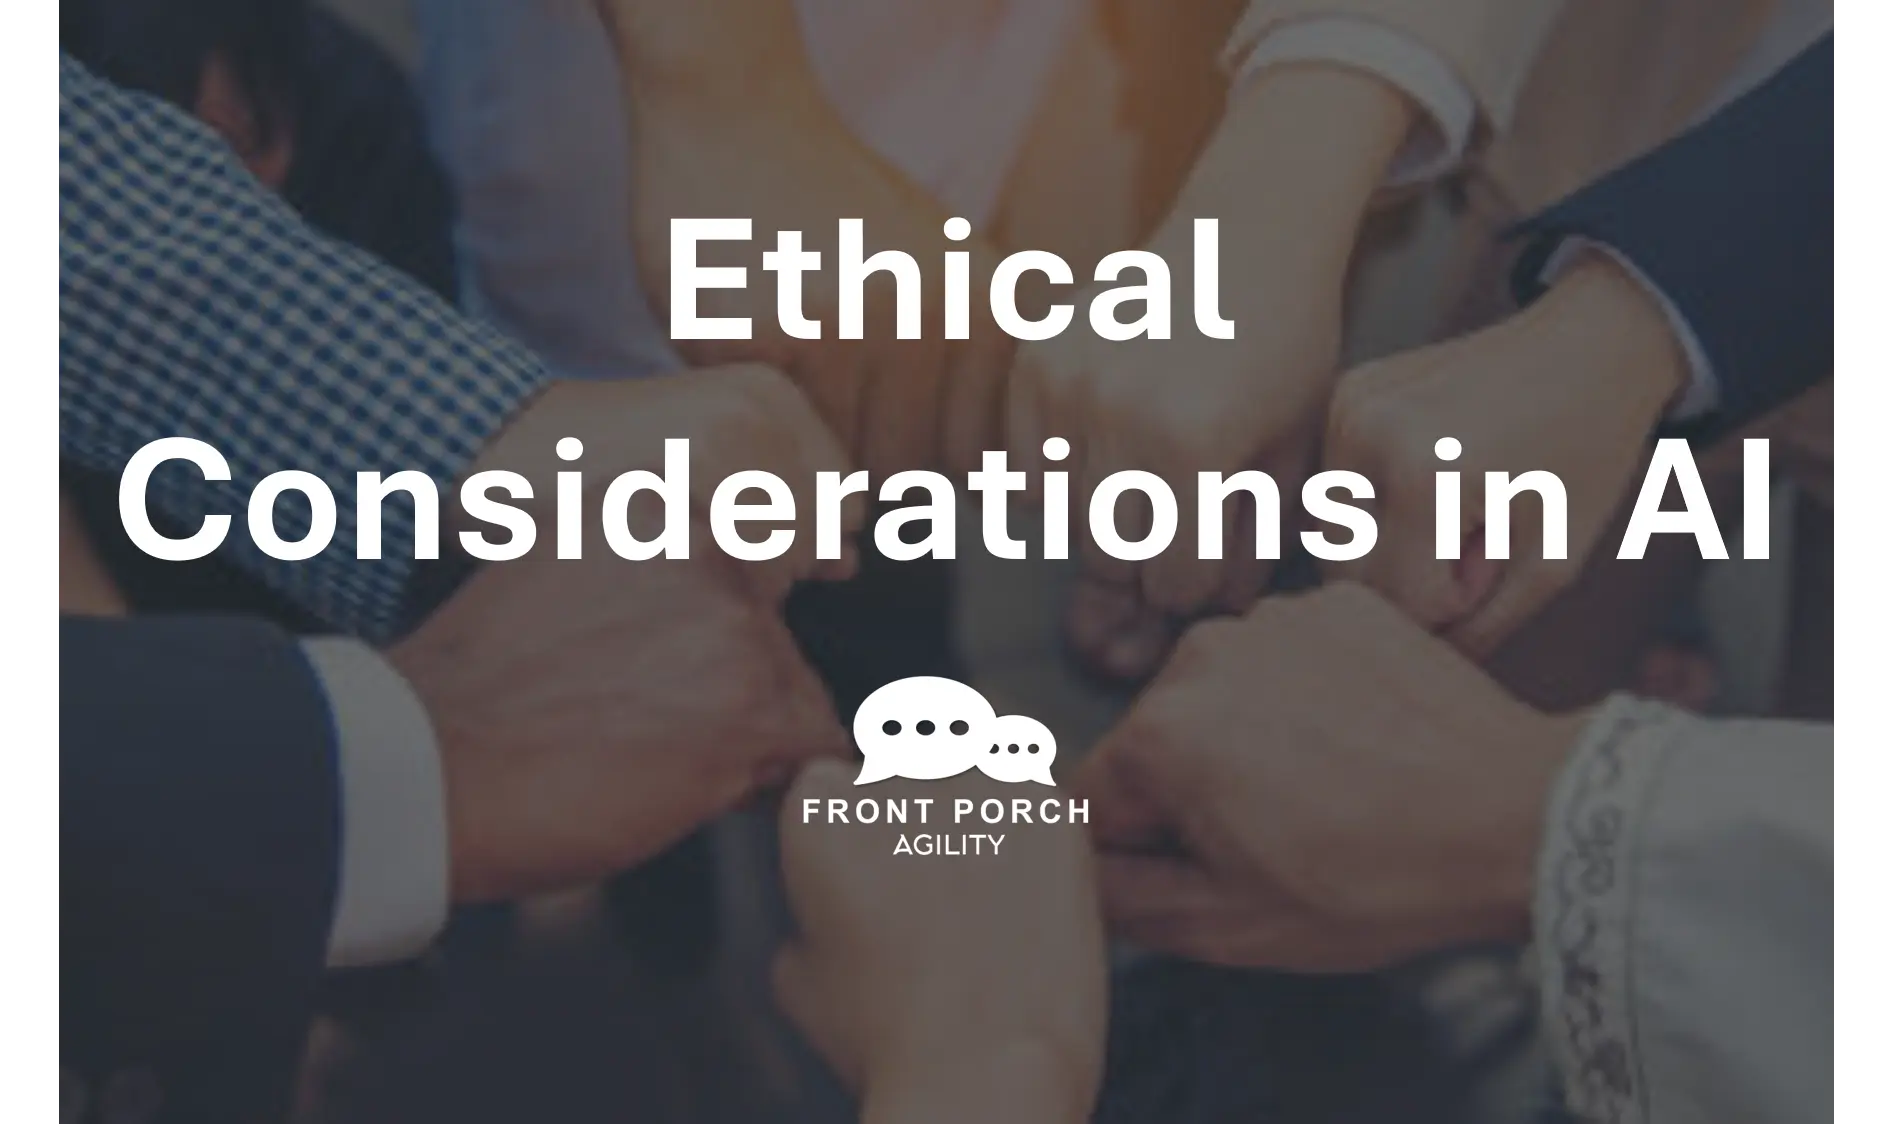 Ethical Consideration in AI